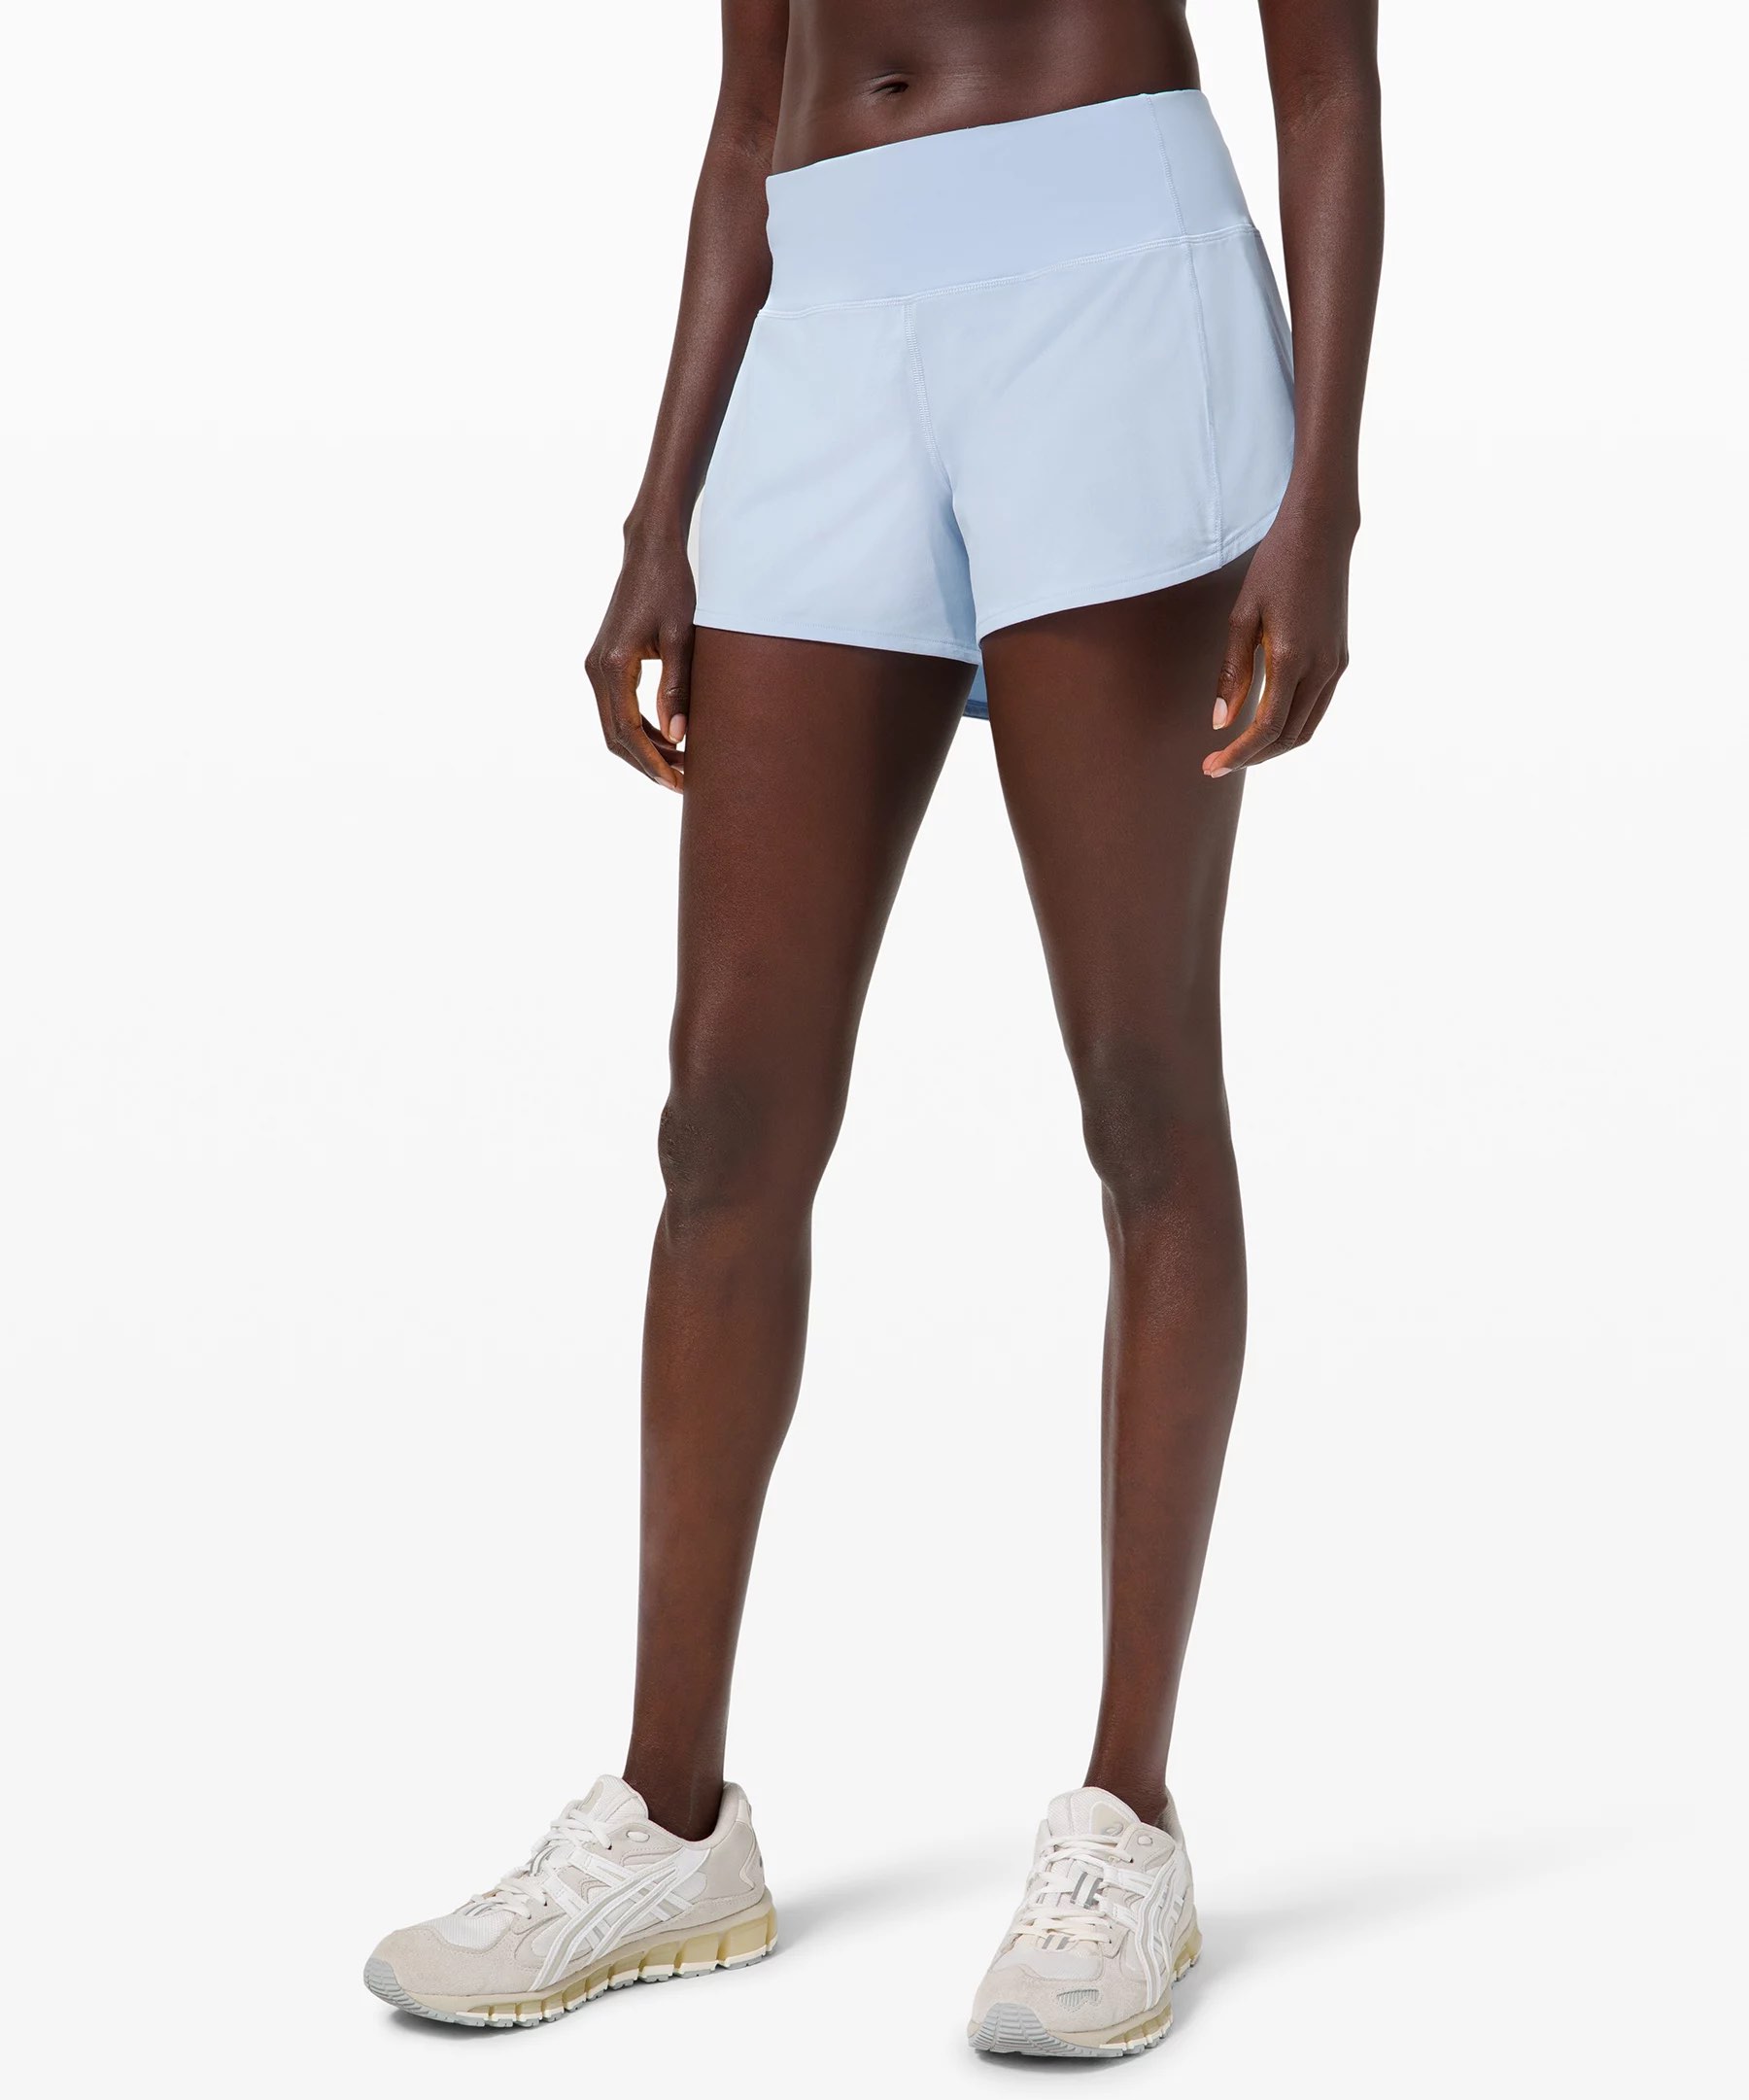 I Finally Found Running Shorts That Don't Chafe My Thighs